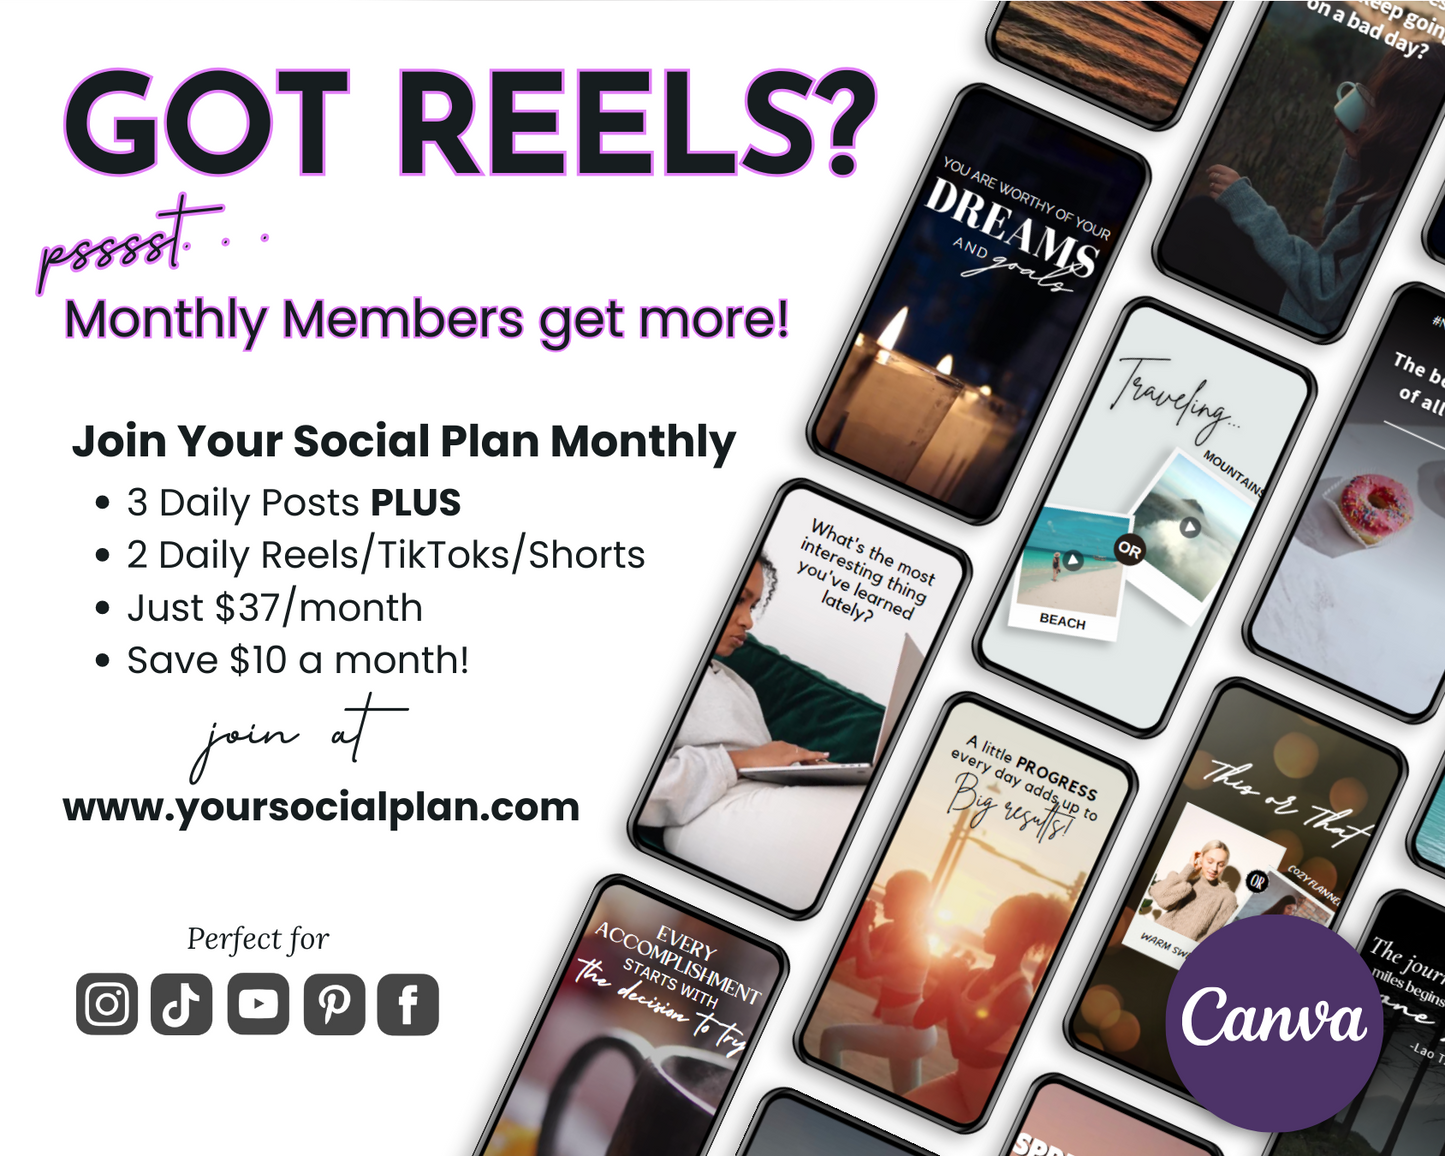 A flyer for the "March Daily Posting Plan - Your Social Plan" by Get Socially Inclined, aimed to boost engagement and propel business growth.